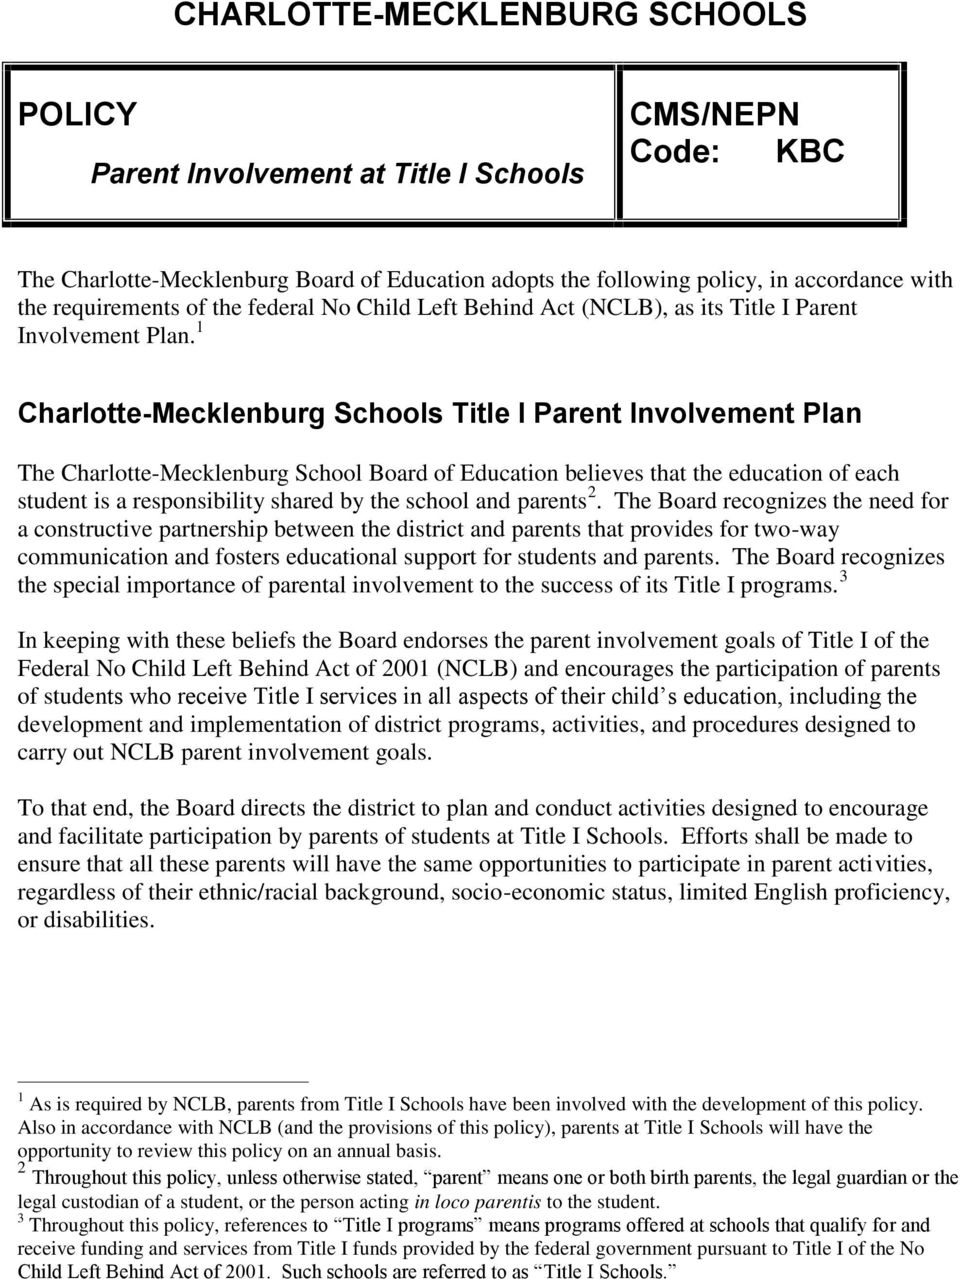 1 Charlotte-Mecklenburg Schools Title I Parent Involvement Plan The Charlotte-Mecklenburg School Board of Education believes that the education of each student is a responsibility shared by the